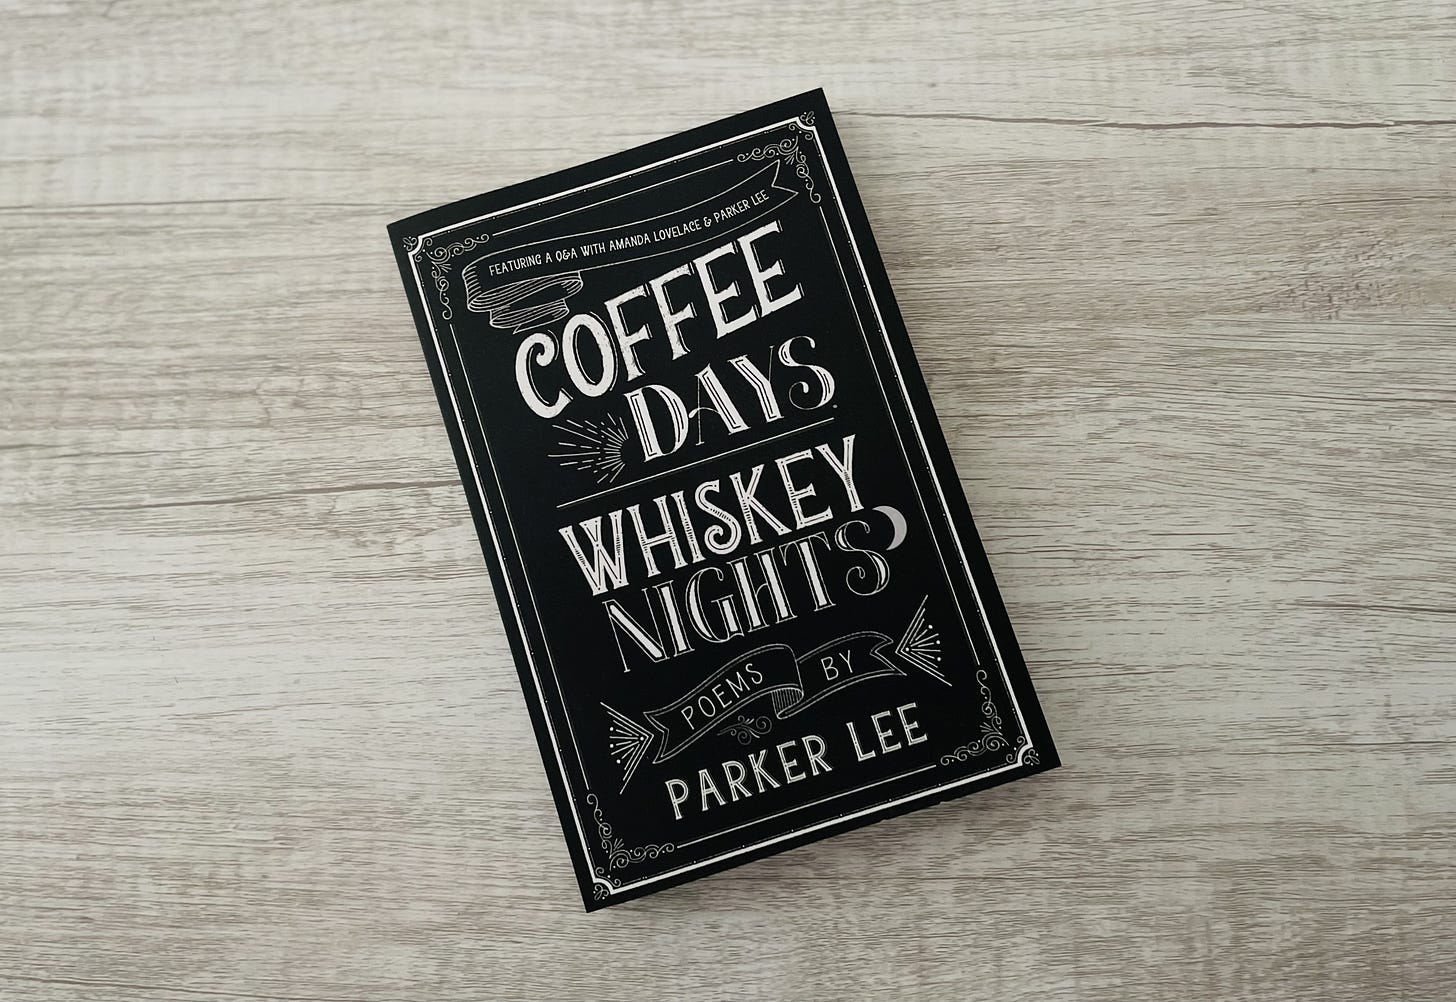 a photo of parker's book "coffee days whiskey nights" sitting on a llight gray wooden surface. this version lists "parker lee as the author"